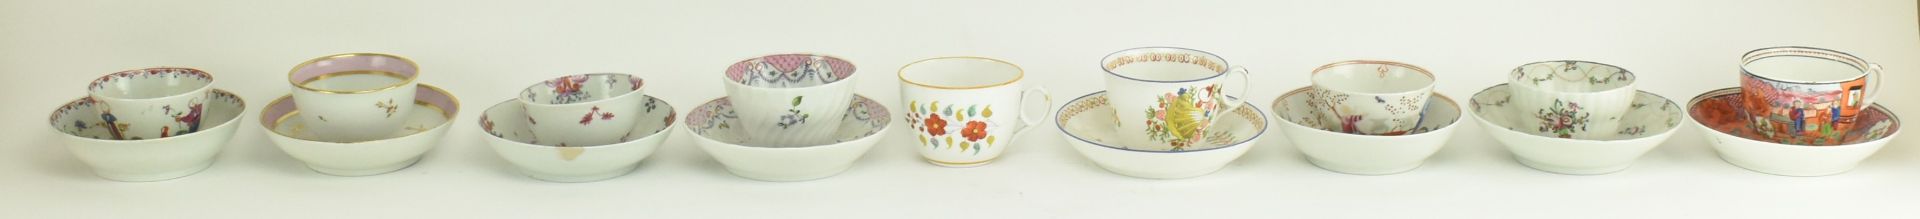 GROUP OF 18TH CENTURY NEWHALL PORCELAIN CUPS AND SAUCERS - Bild 2 aus 7